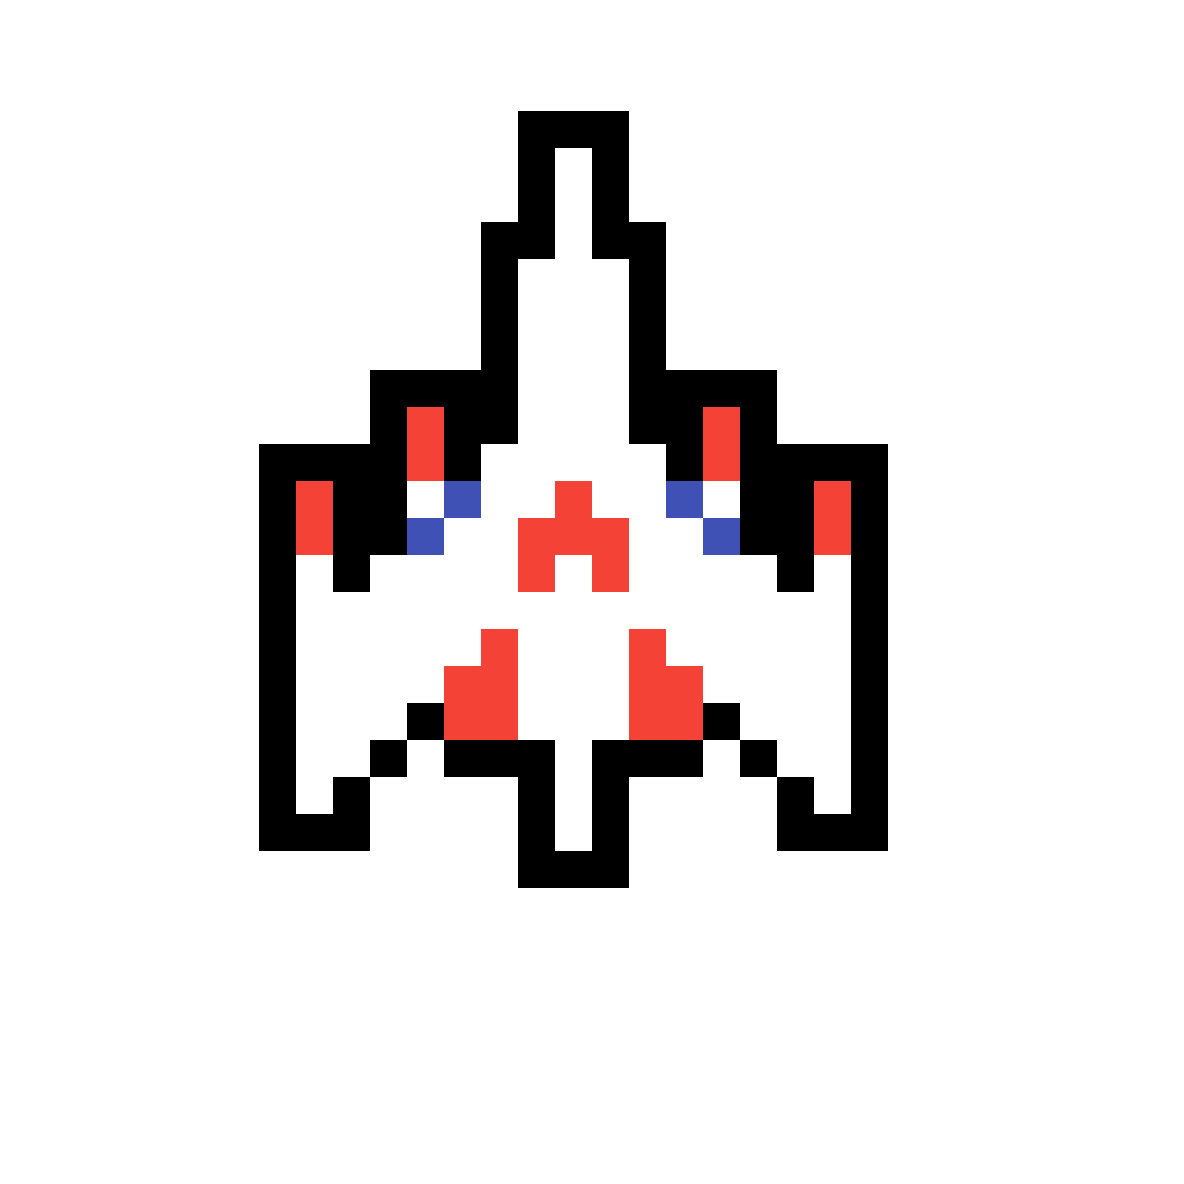 space invaders ship png